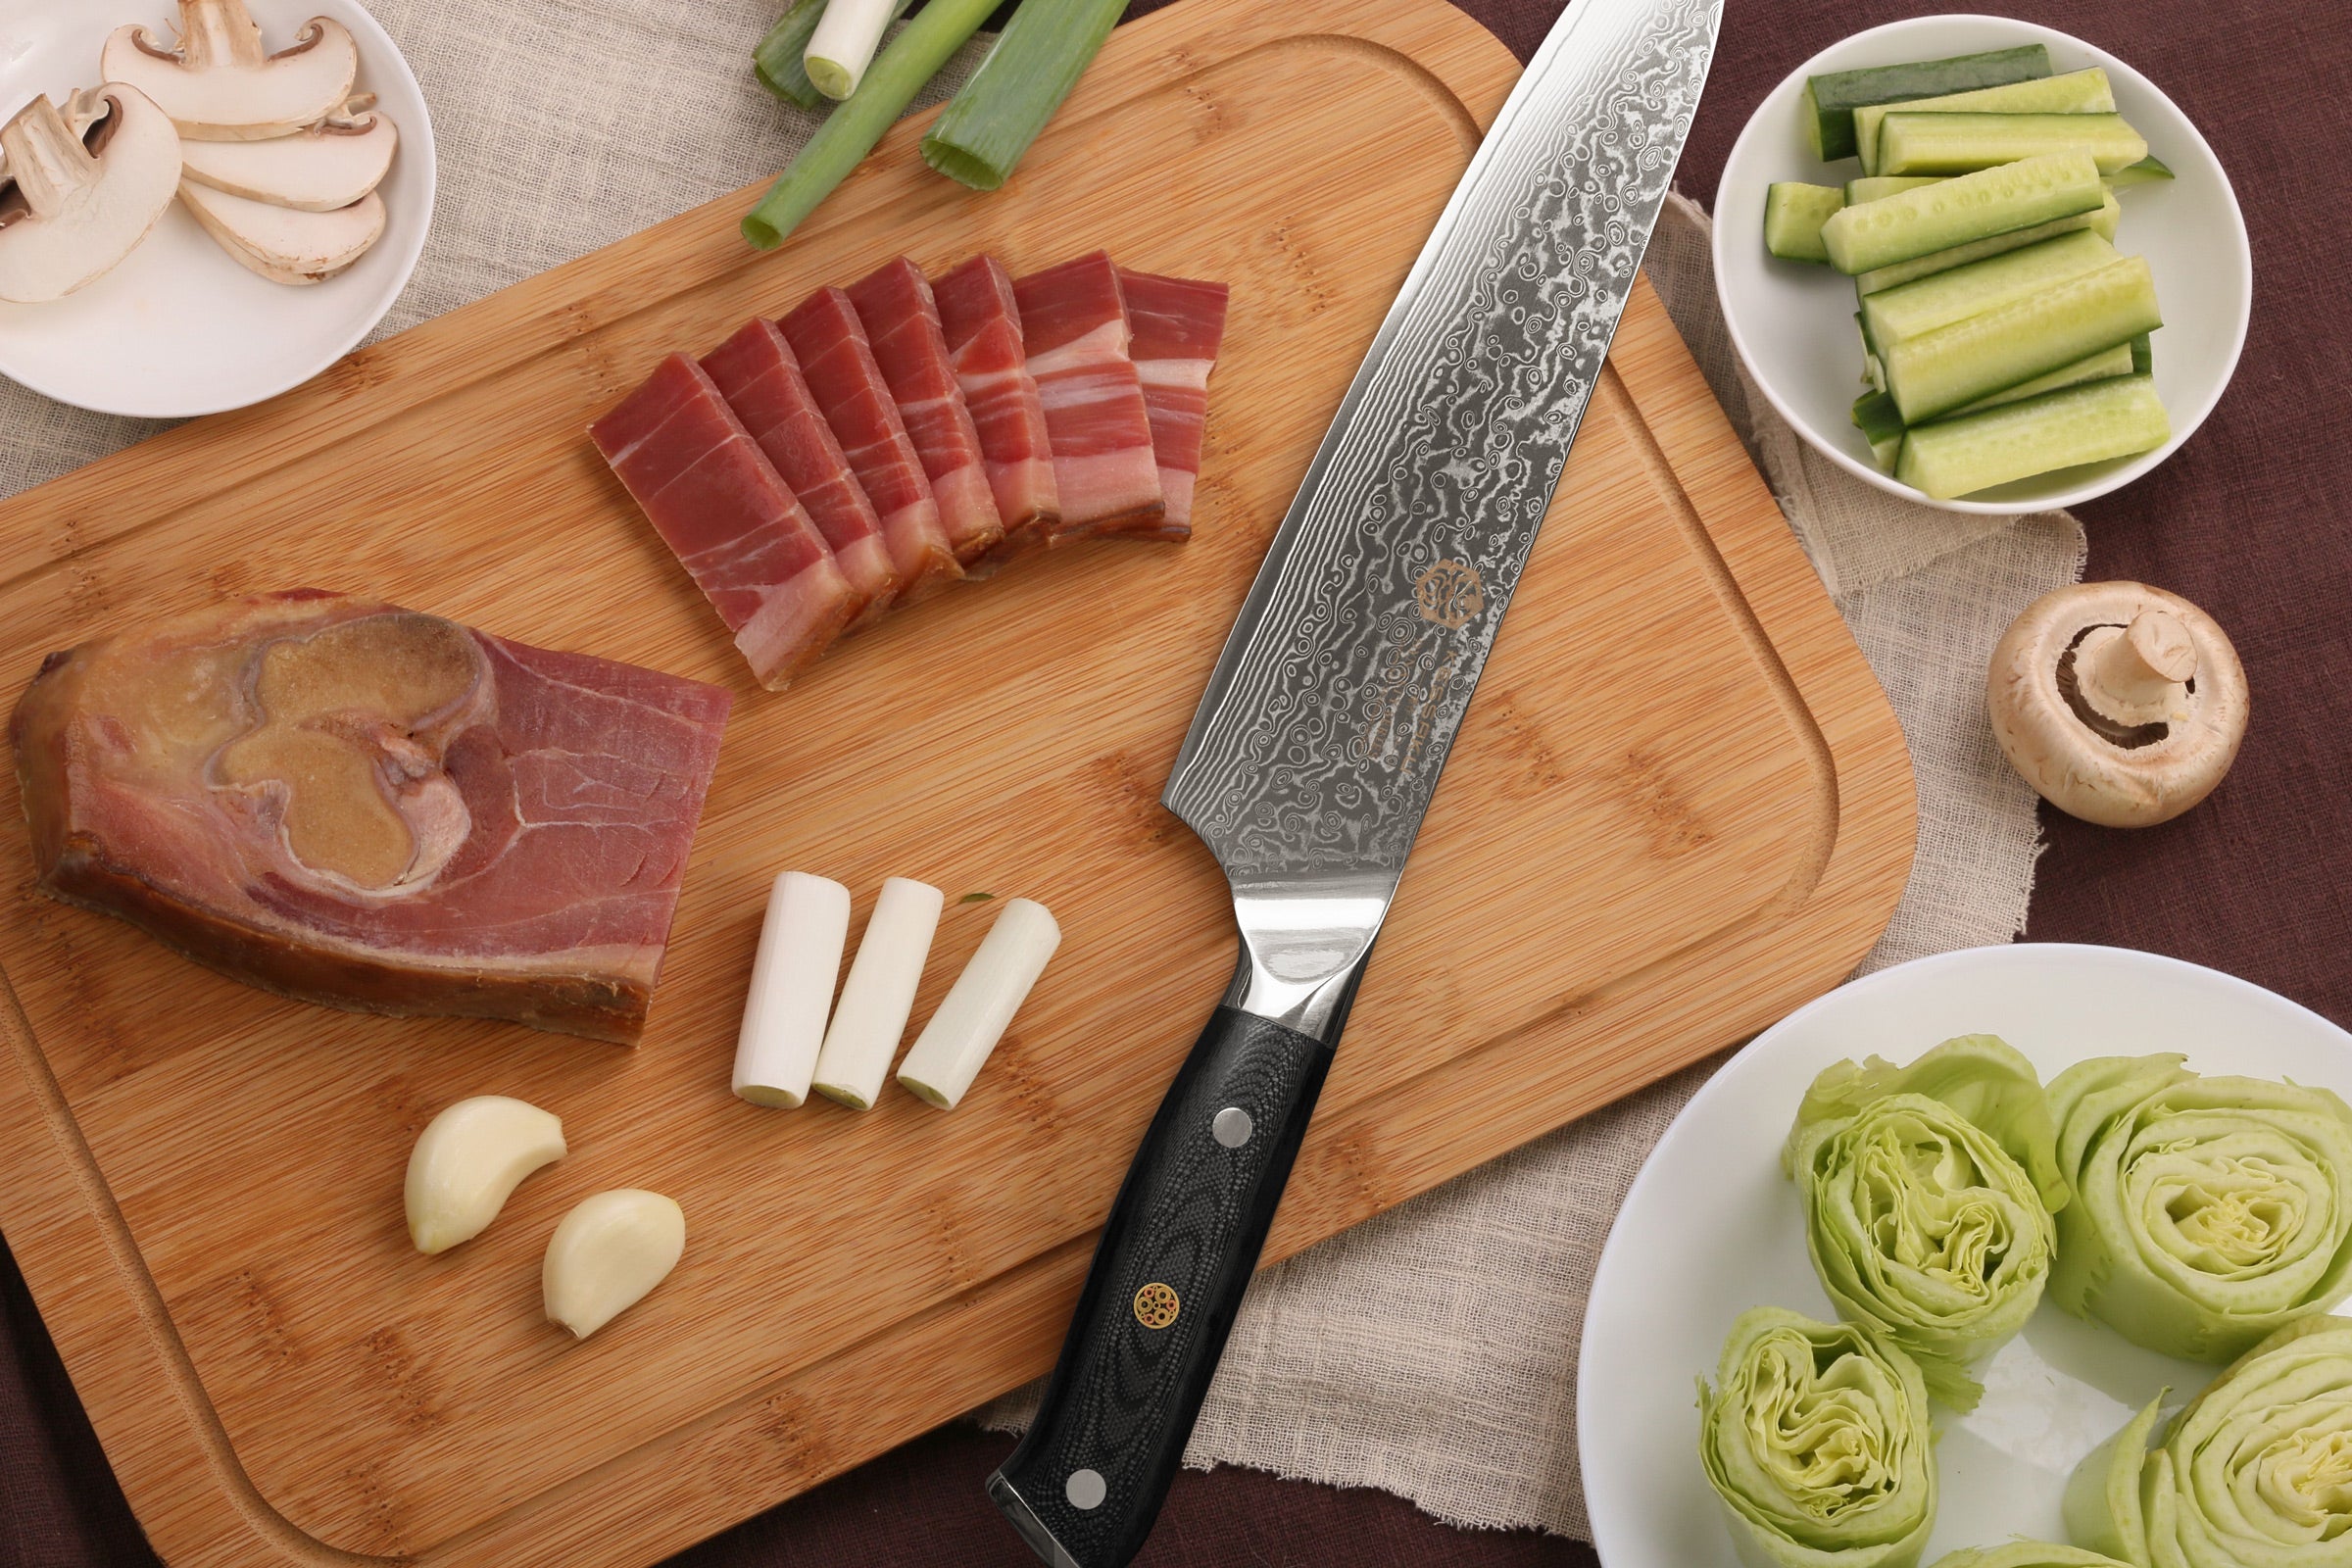 The Kessaku Dynasty Damascus Chef's Knife with thick slices of bacon, green onion, cloves of garlic, zucchini